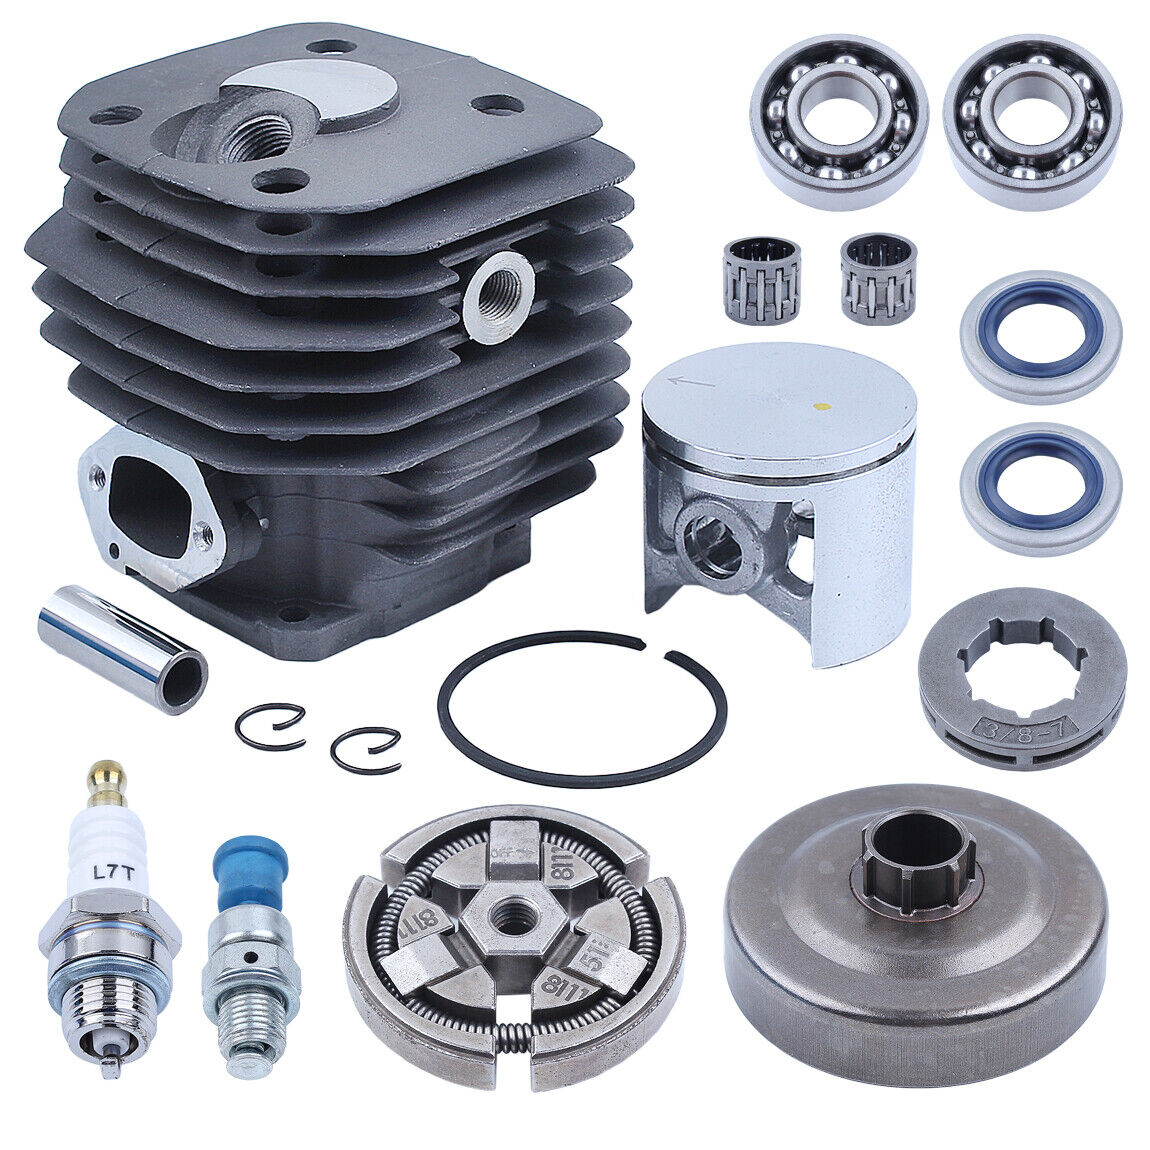 Bore 48mm Cylinder Piston Kit For Husqvarna 261 262 262XP Chainsaw Clutch Drum